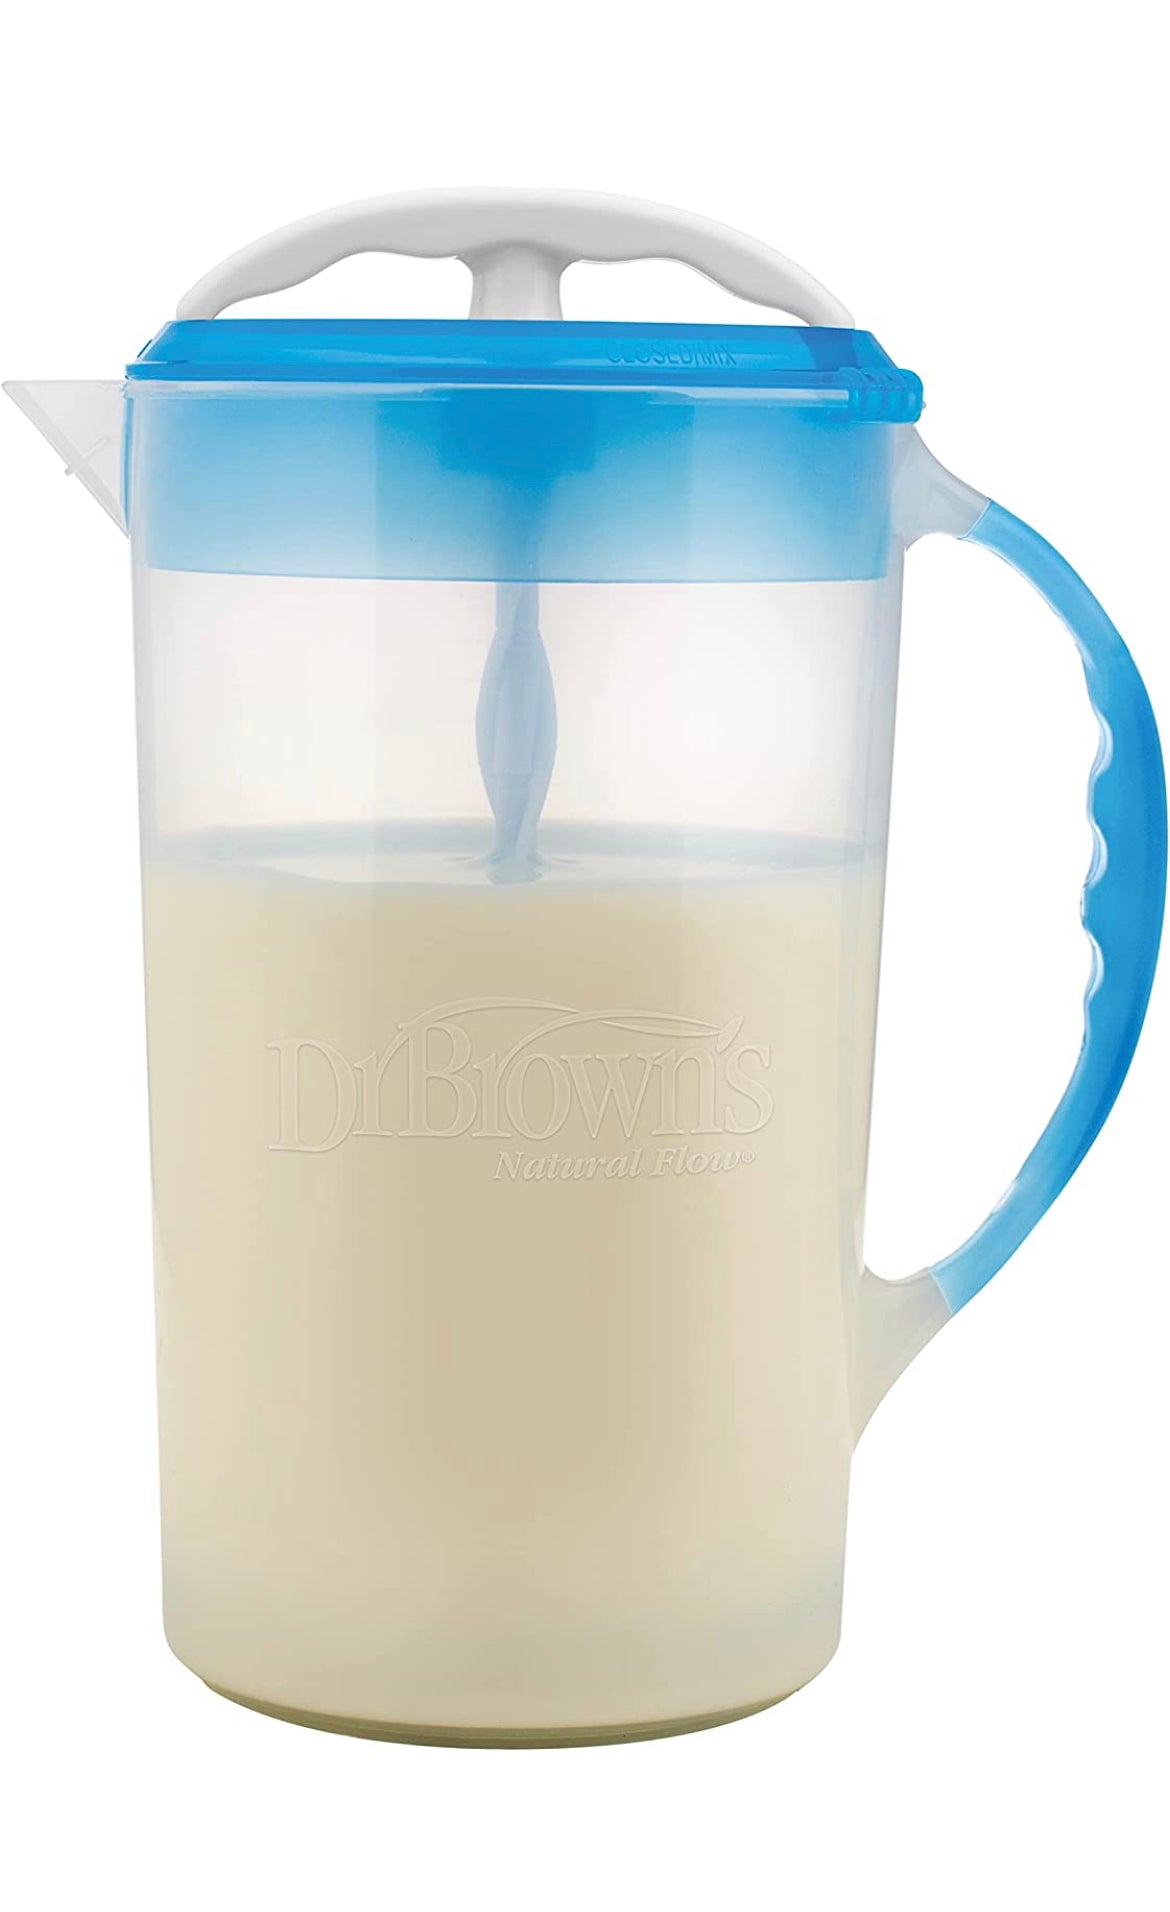 Dr. Brown's Formula Mixing Pitcher.